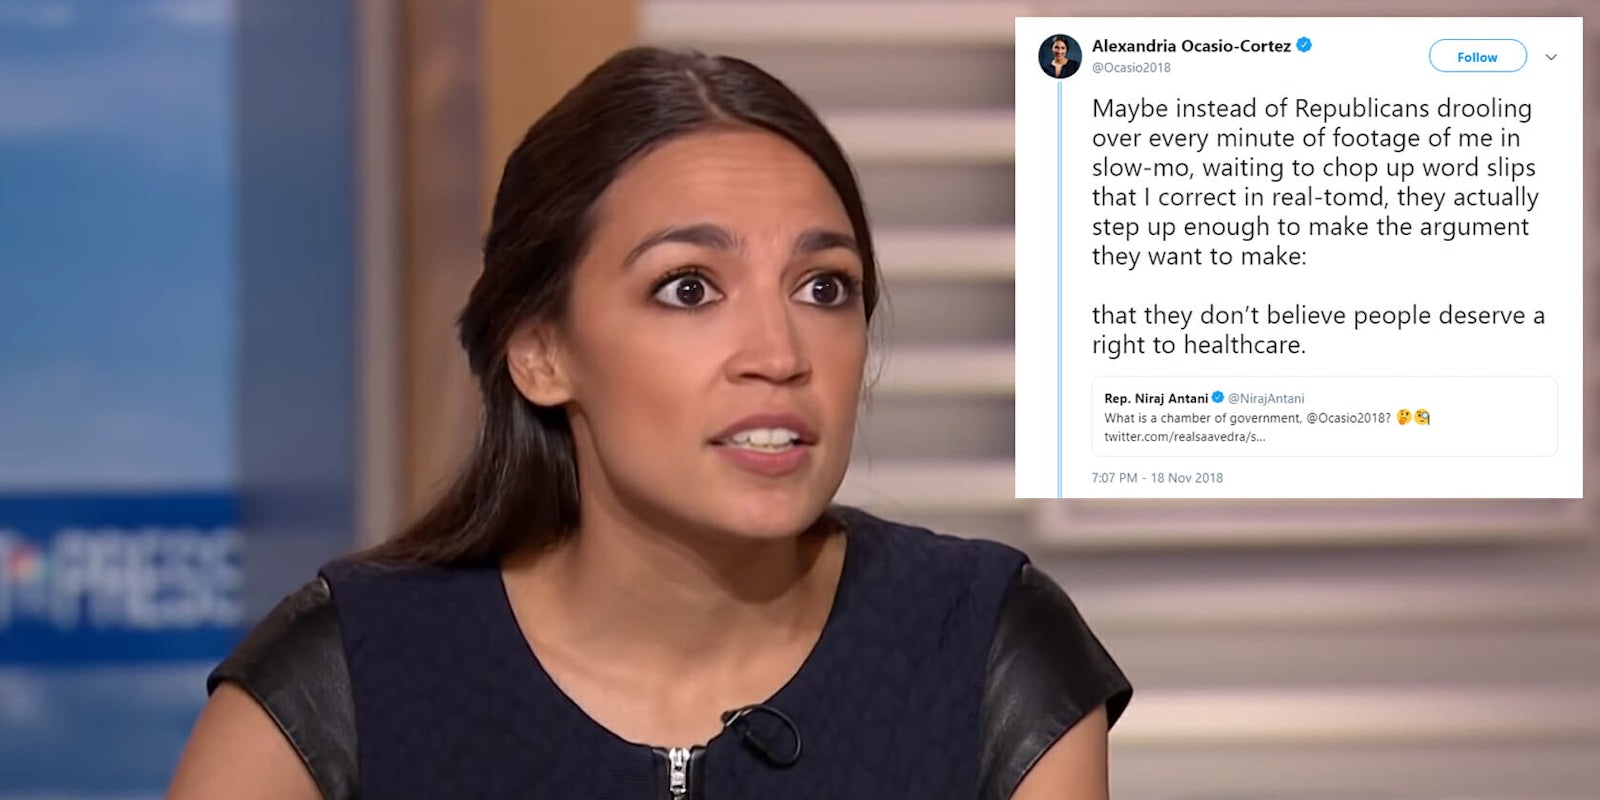 Representative-elect Alexandria Ocasio-Cortez clapped back at Republicans who have continued to criticize her after a state lawmaker from Ohio mocked a mistake she made during a live stream.